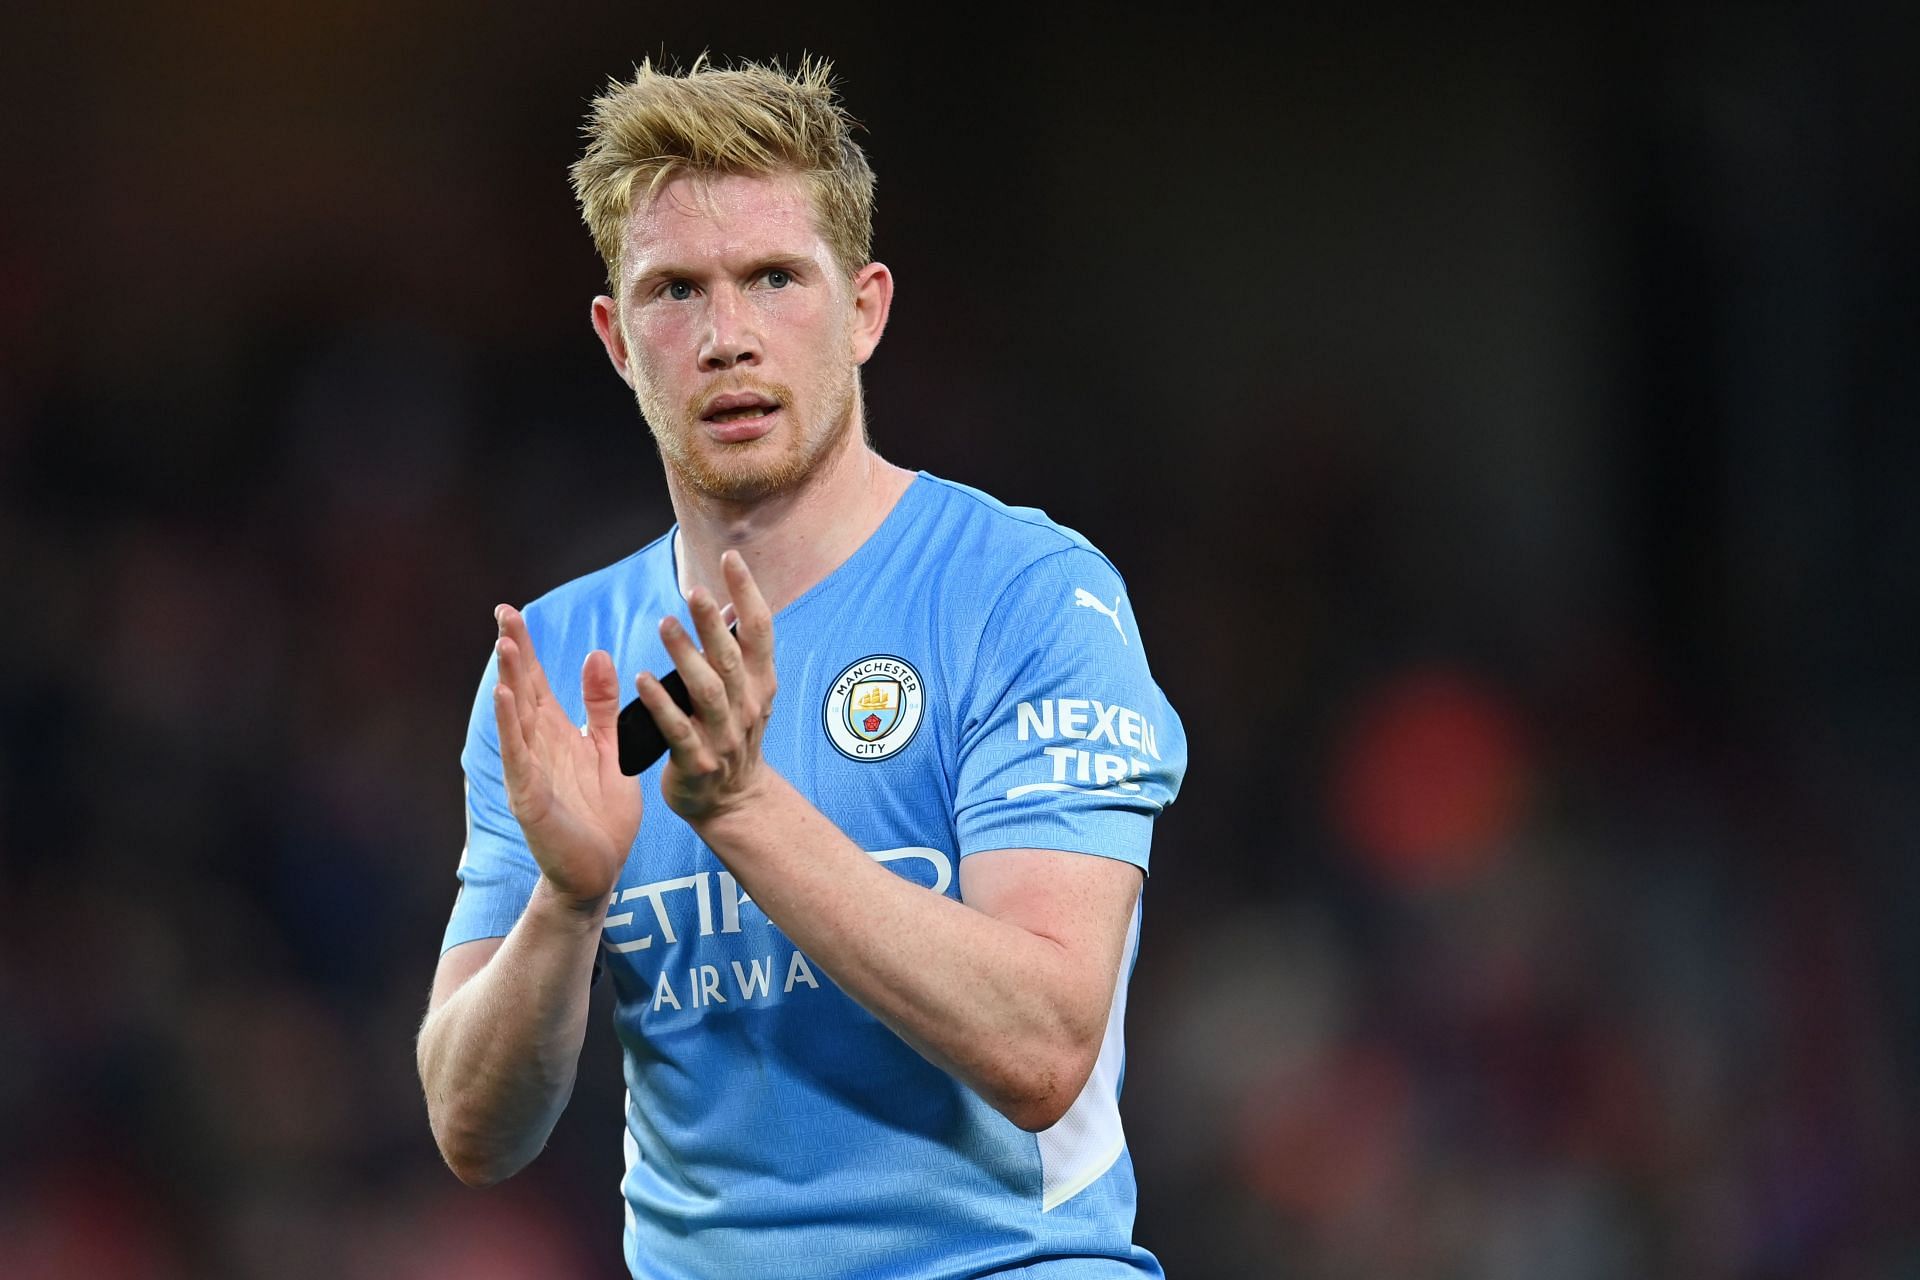 KDB is the joint record holder for the highest number of assists (20) in a single season